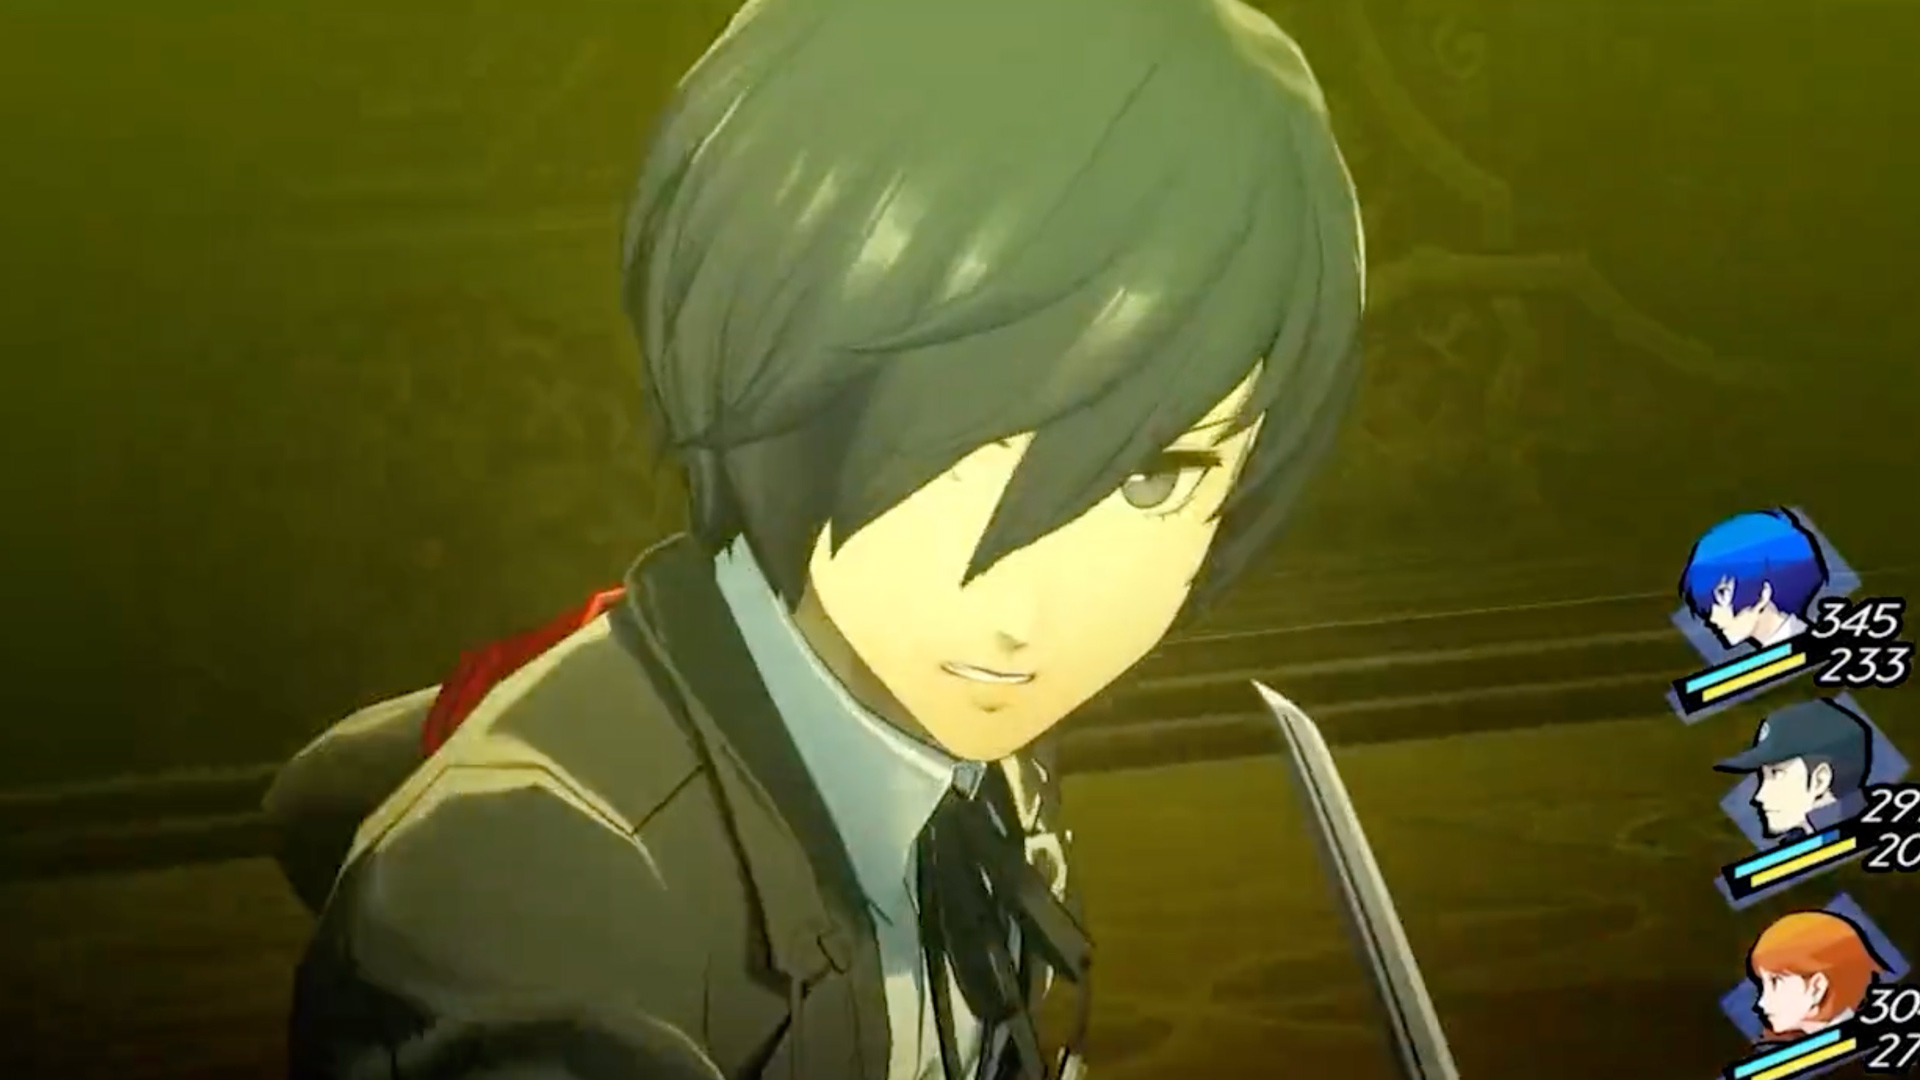 Persona 3 reload expansion pass. Persona 3 Reload. Persona 3 relod. Persona 3 ремейк. Persona 3 Reload Makoto.